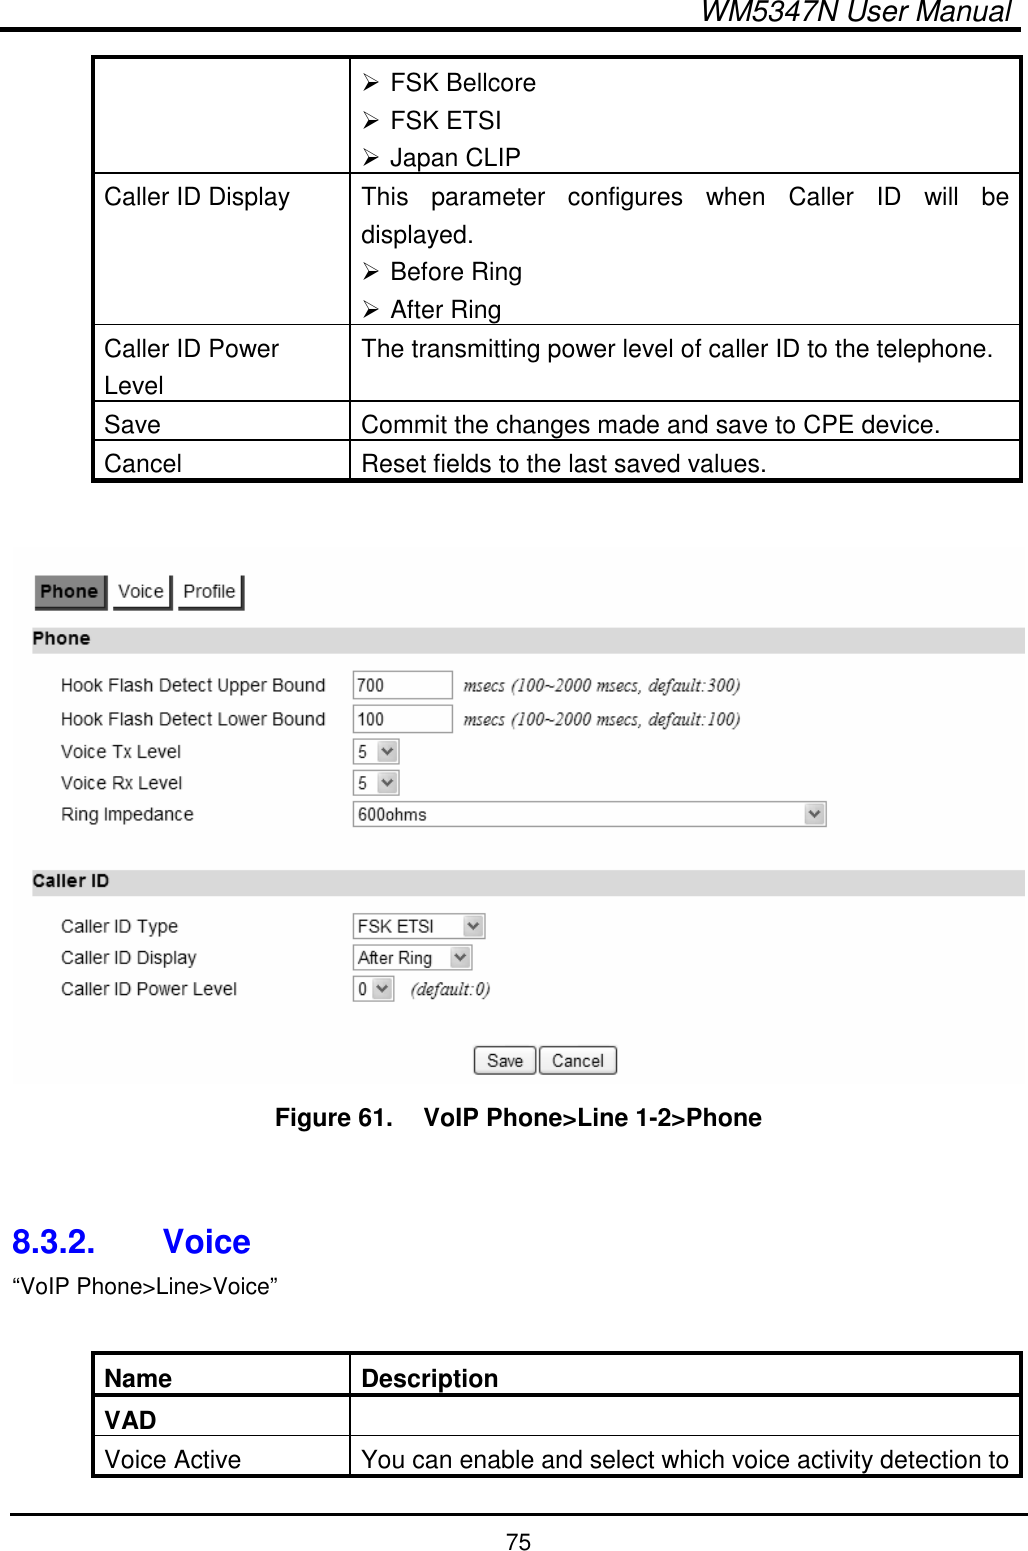  WM5347N User Manual  75  FSK Bellcore  FSK ETSI  Japan CLIP Caller ID Display  This  parameter  configures  when  Caller  ID  will  be displayed.  Before Ring  After Ring Caller ID Power Level The transmitting power level of caller ID to the telephone. Save  Commit the changes made and save to CPE device. Cancel  Reset fields to the last saved values.   Figure 61.   VoIP Phone&gt;Line 1-2&gt;Phone   8.3.2.  Voice “VoIP Phone&gt;Line&gt;Voice”  Name  Description VAD   Voice Active  You can enable and select which voice activity detection to 